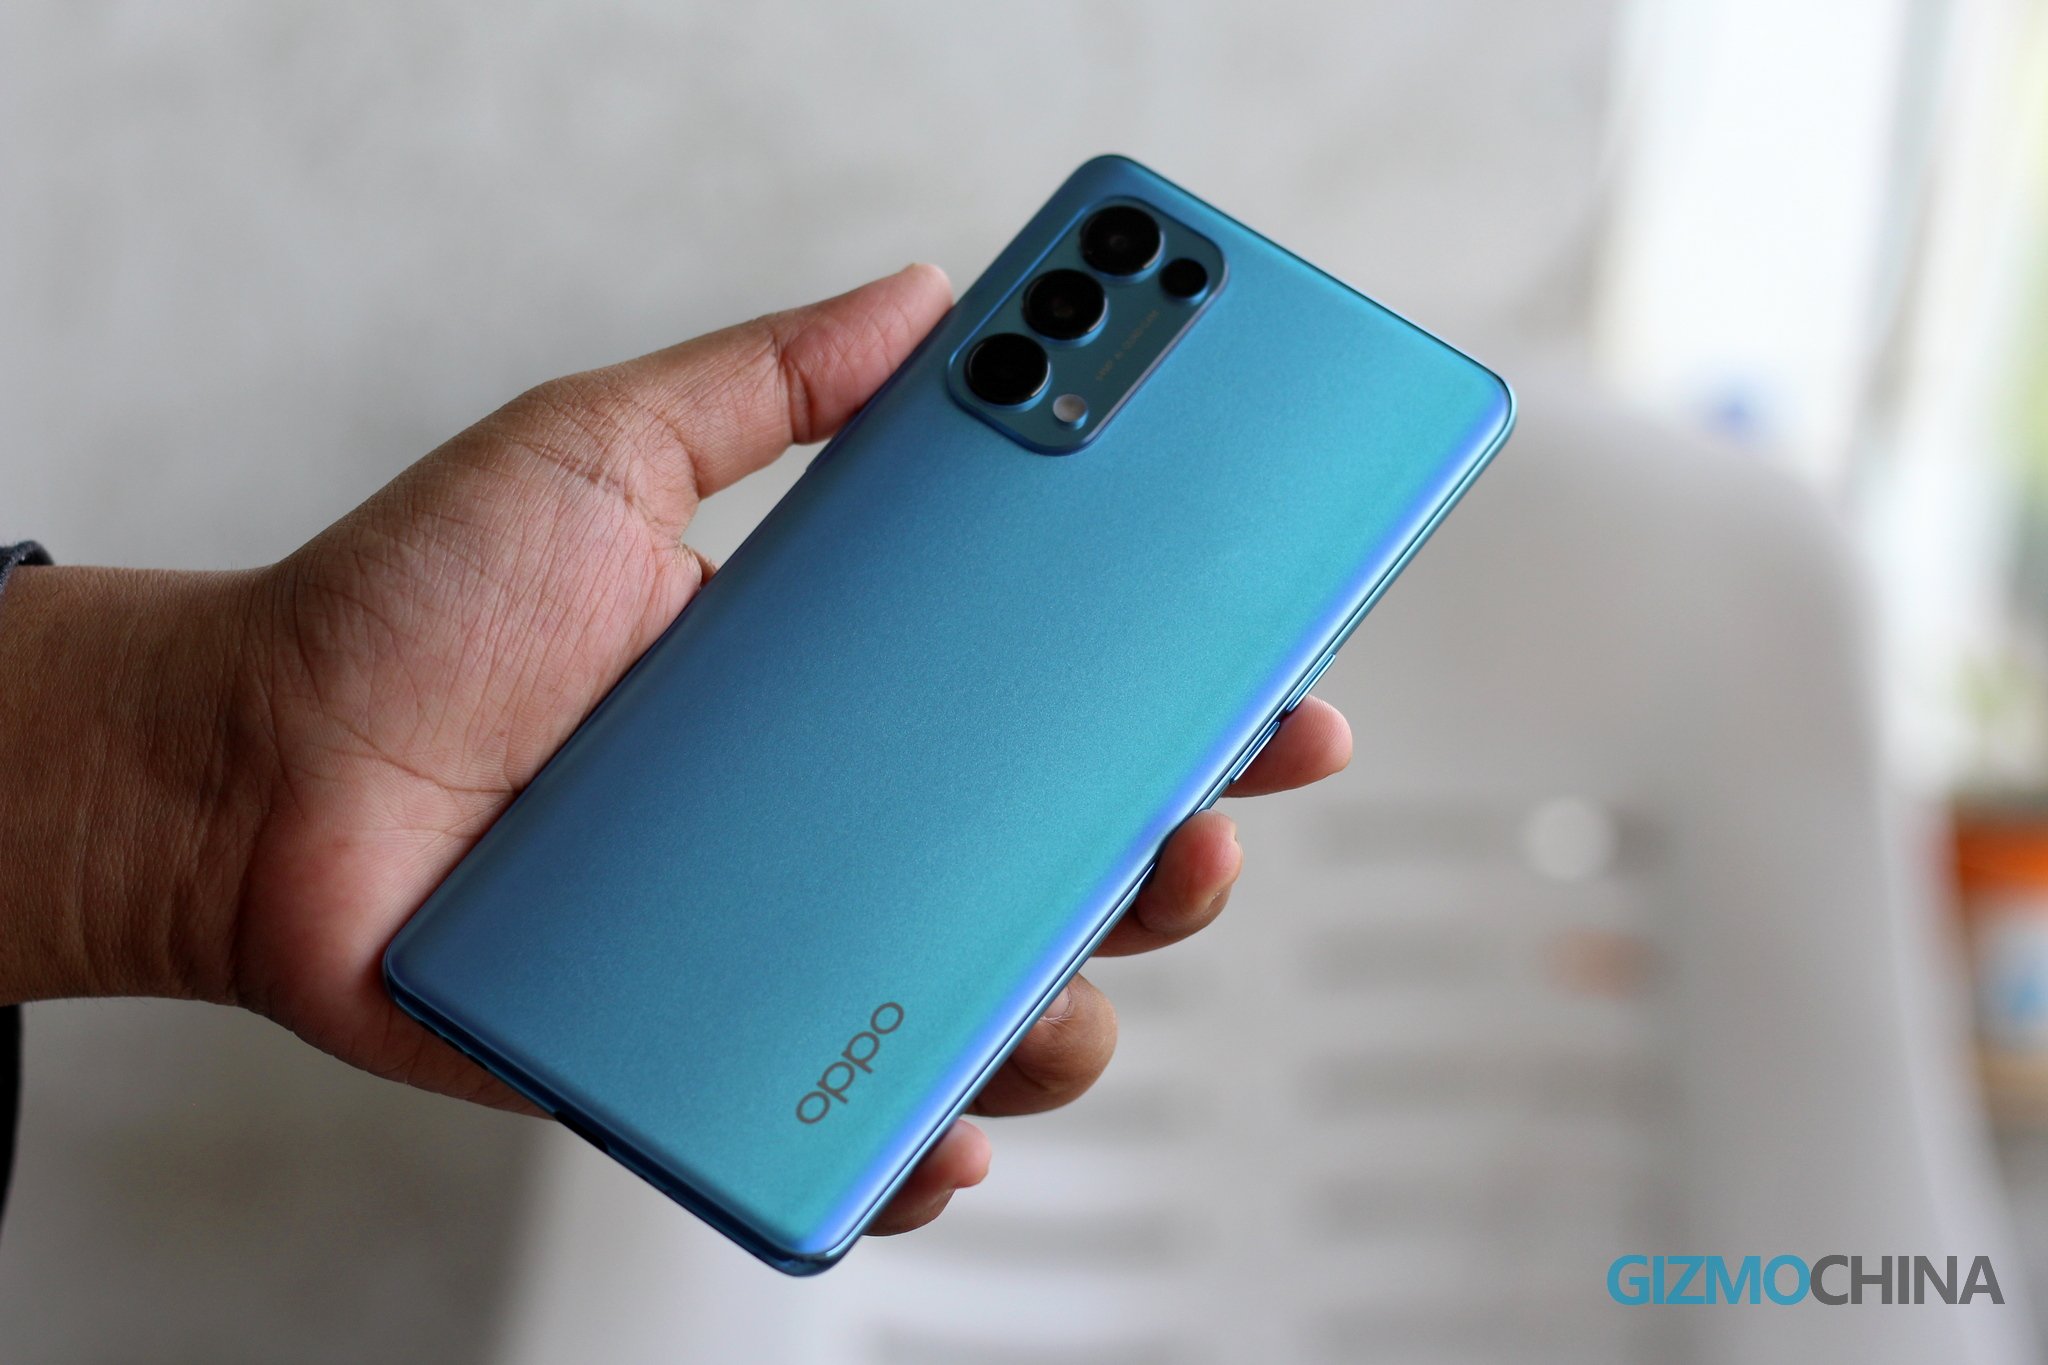 OPPO was China’s largest smartphone brand for the first time in January 2021